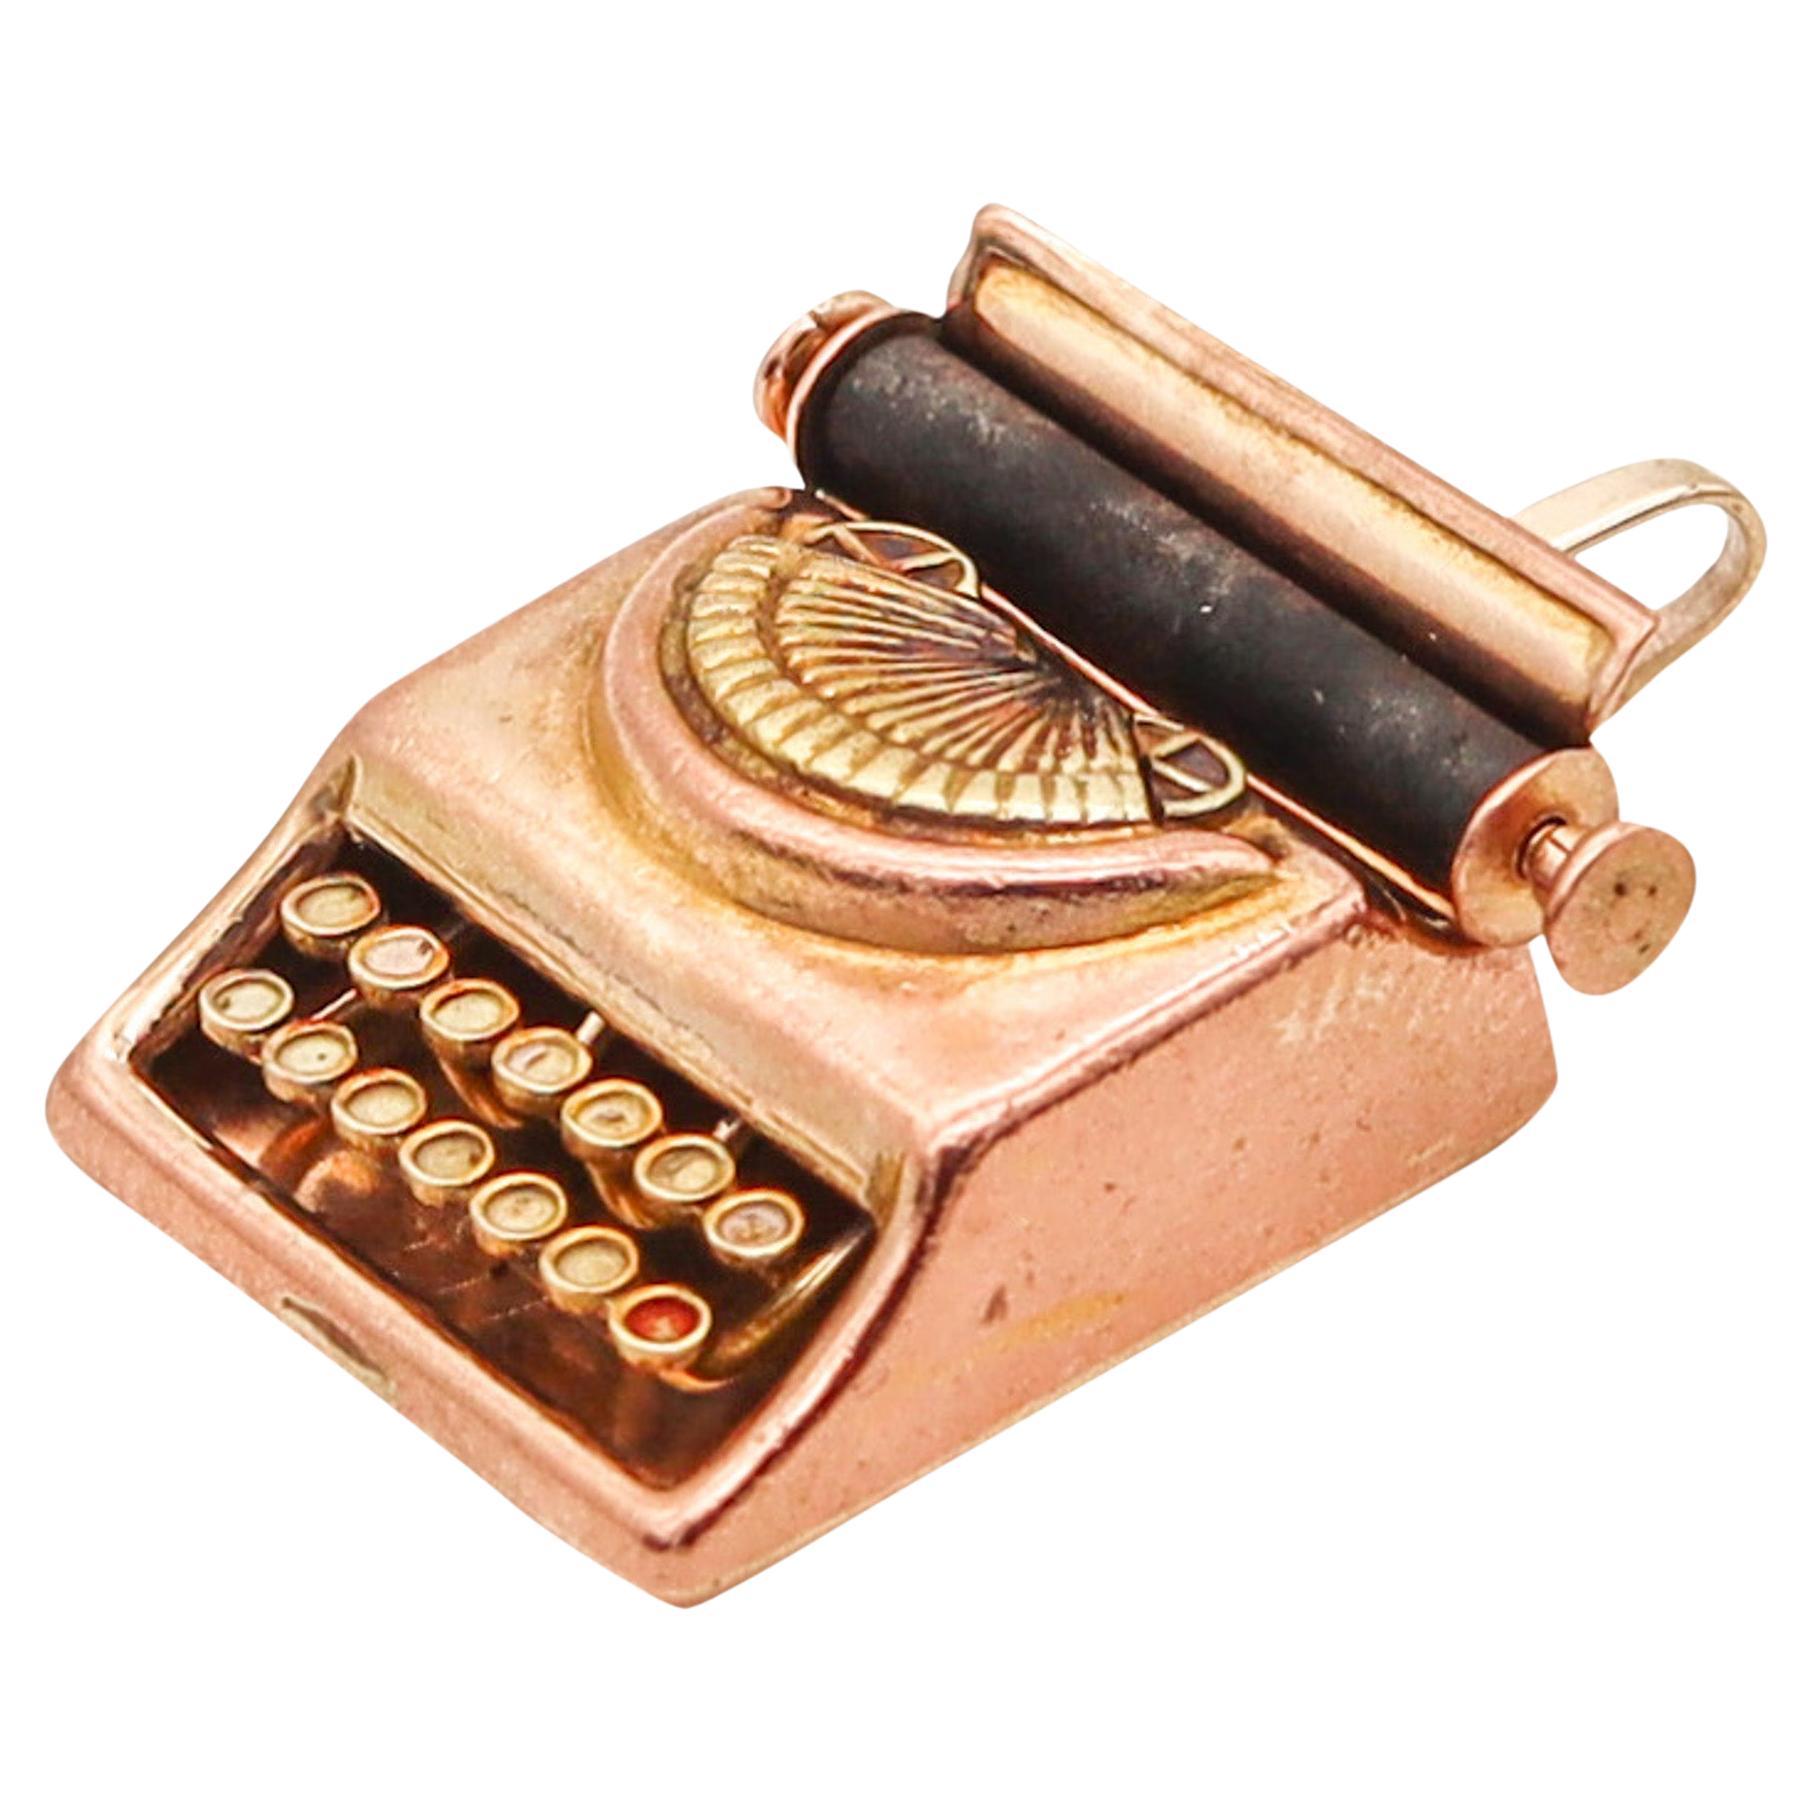 Art Deco 1930 Typewriting Machine Pendant And Charm In Solid 14Kt Yellow Gold